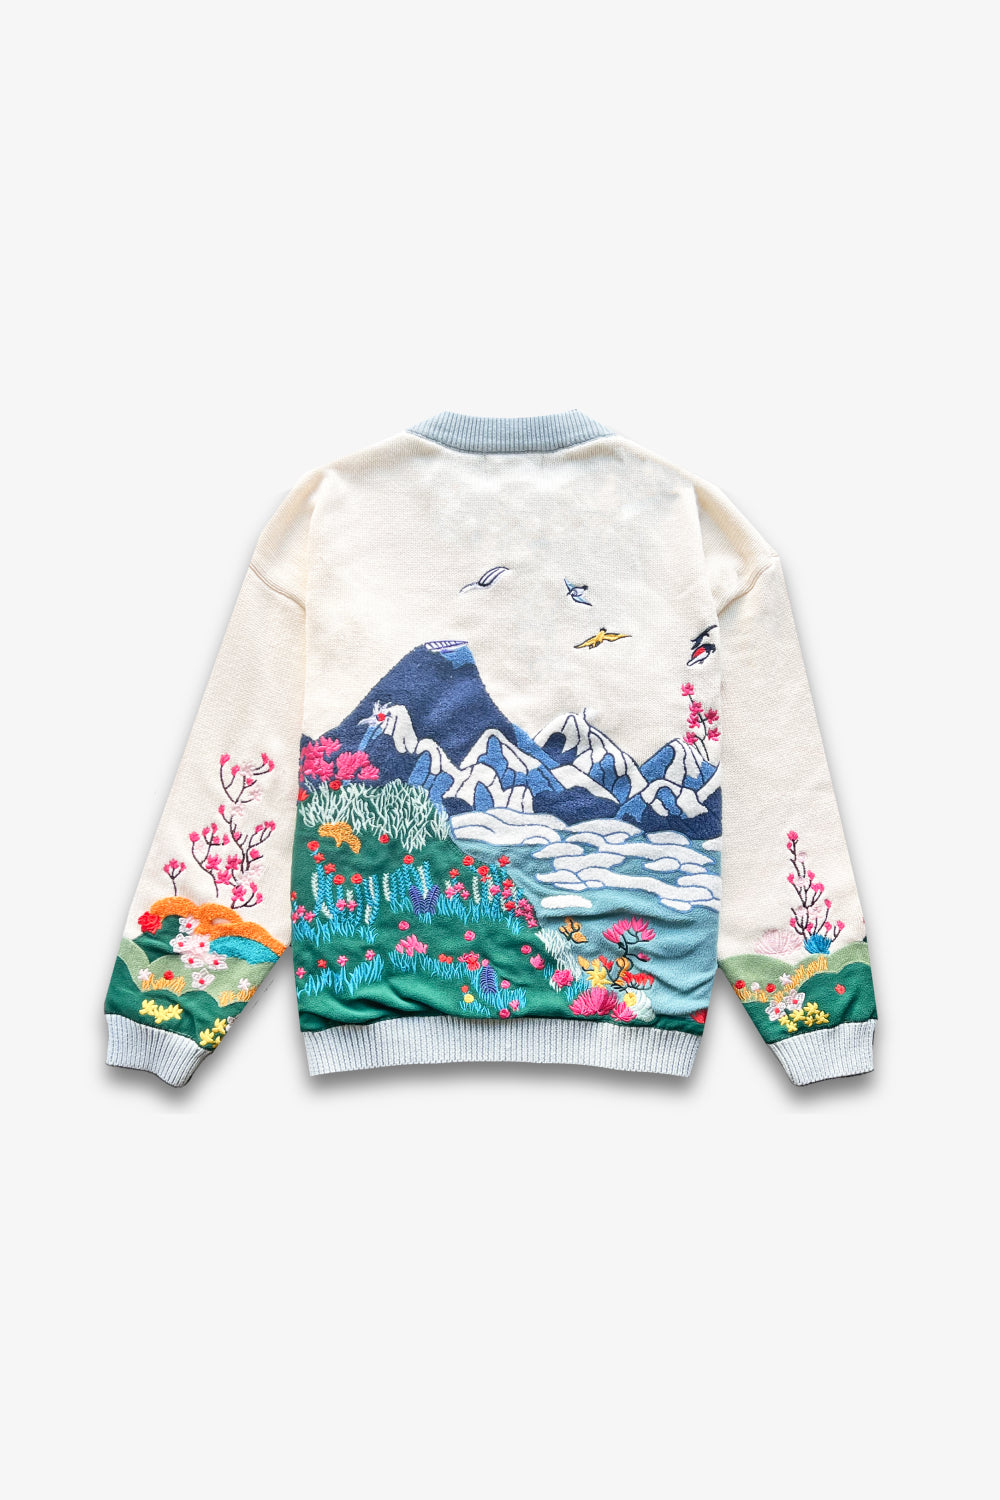 Celestial Embroidery Sweater